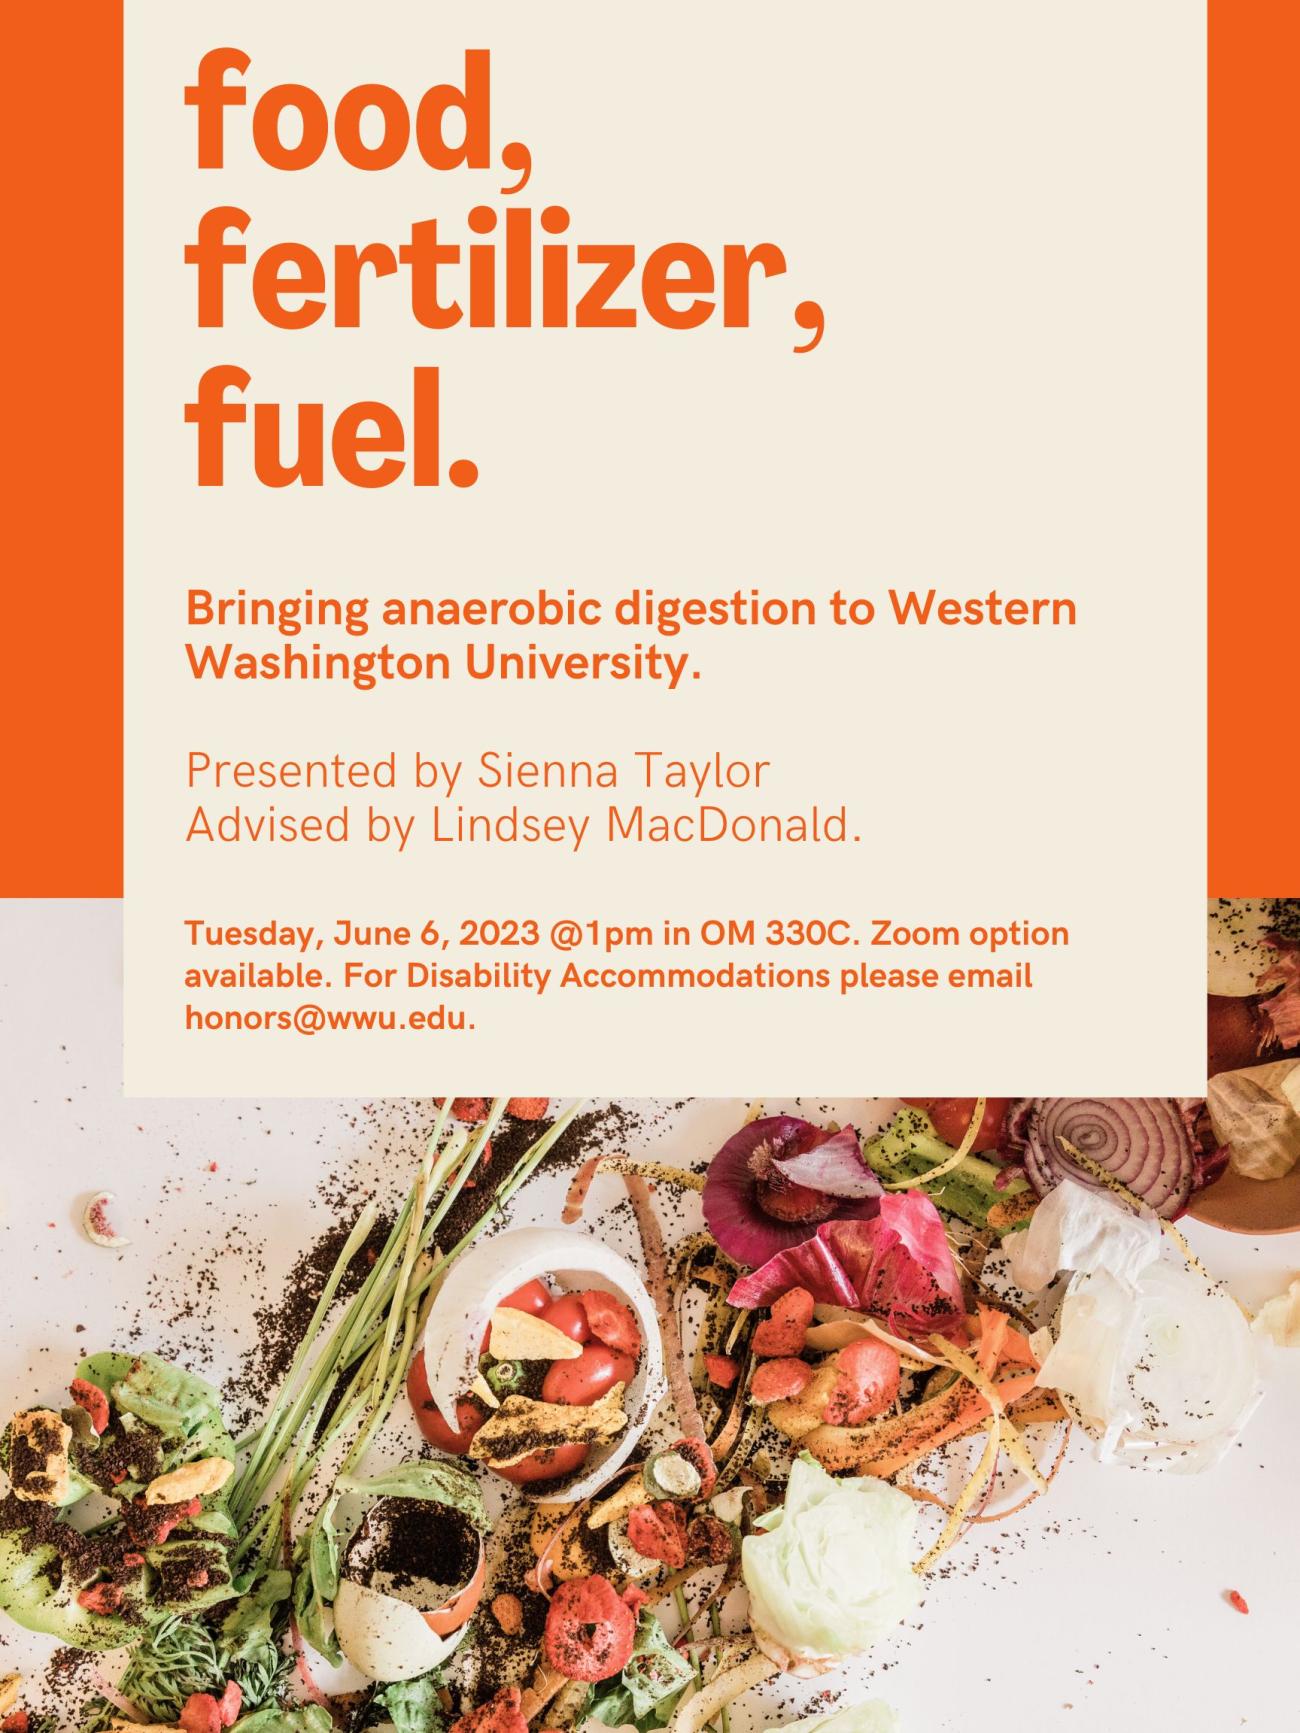  Top half of poster is an orange background with the title, "food, fertilizer, fuel. Bringing anaerobic digestion to Western Washington University. Presented by Sienna Taylor. Advised by Lindsey MacDonald. Tuesday, June 6, 2023 @1pm in OM 330C. Zoom option available. For Disability Accommodations please email honors@wwu.edu." The bottom half of poster is an image of food scraps on a white background. 